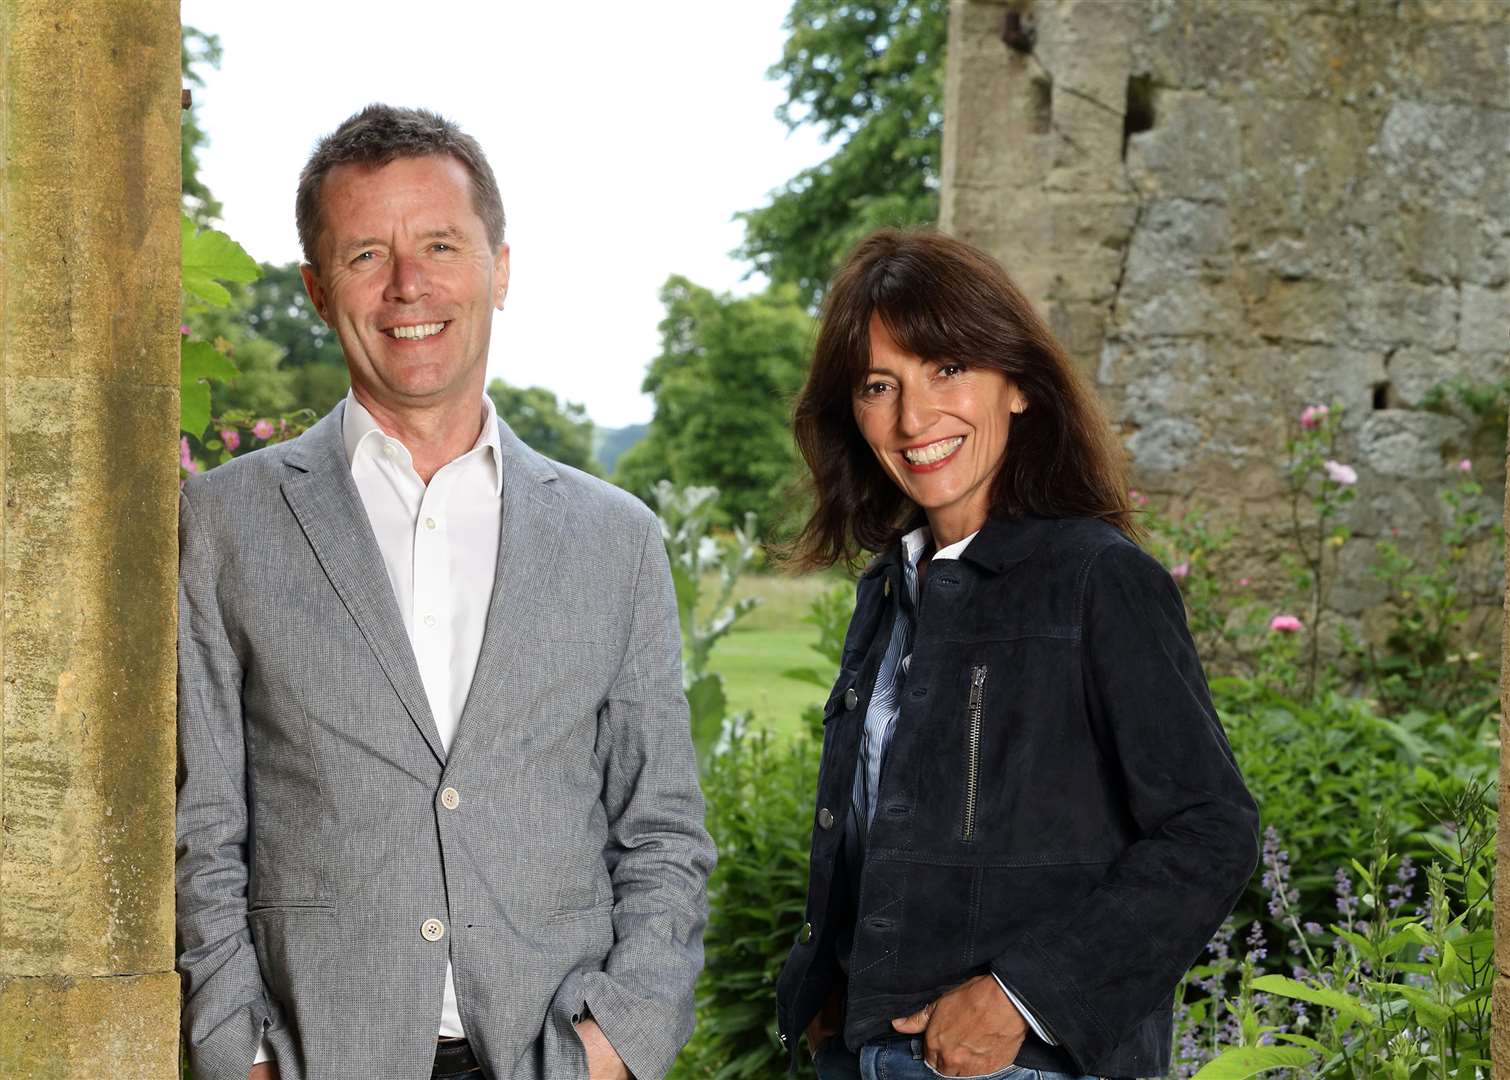 Hosts Nicky Campbell and Davina McCall